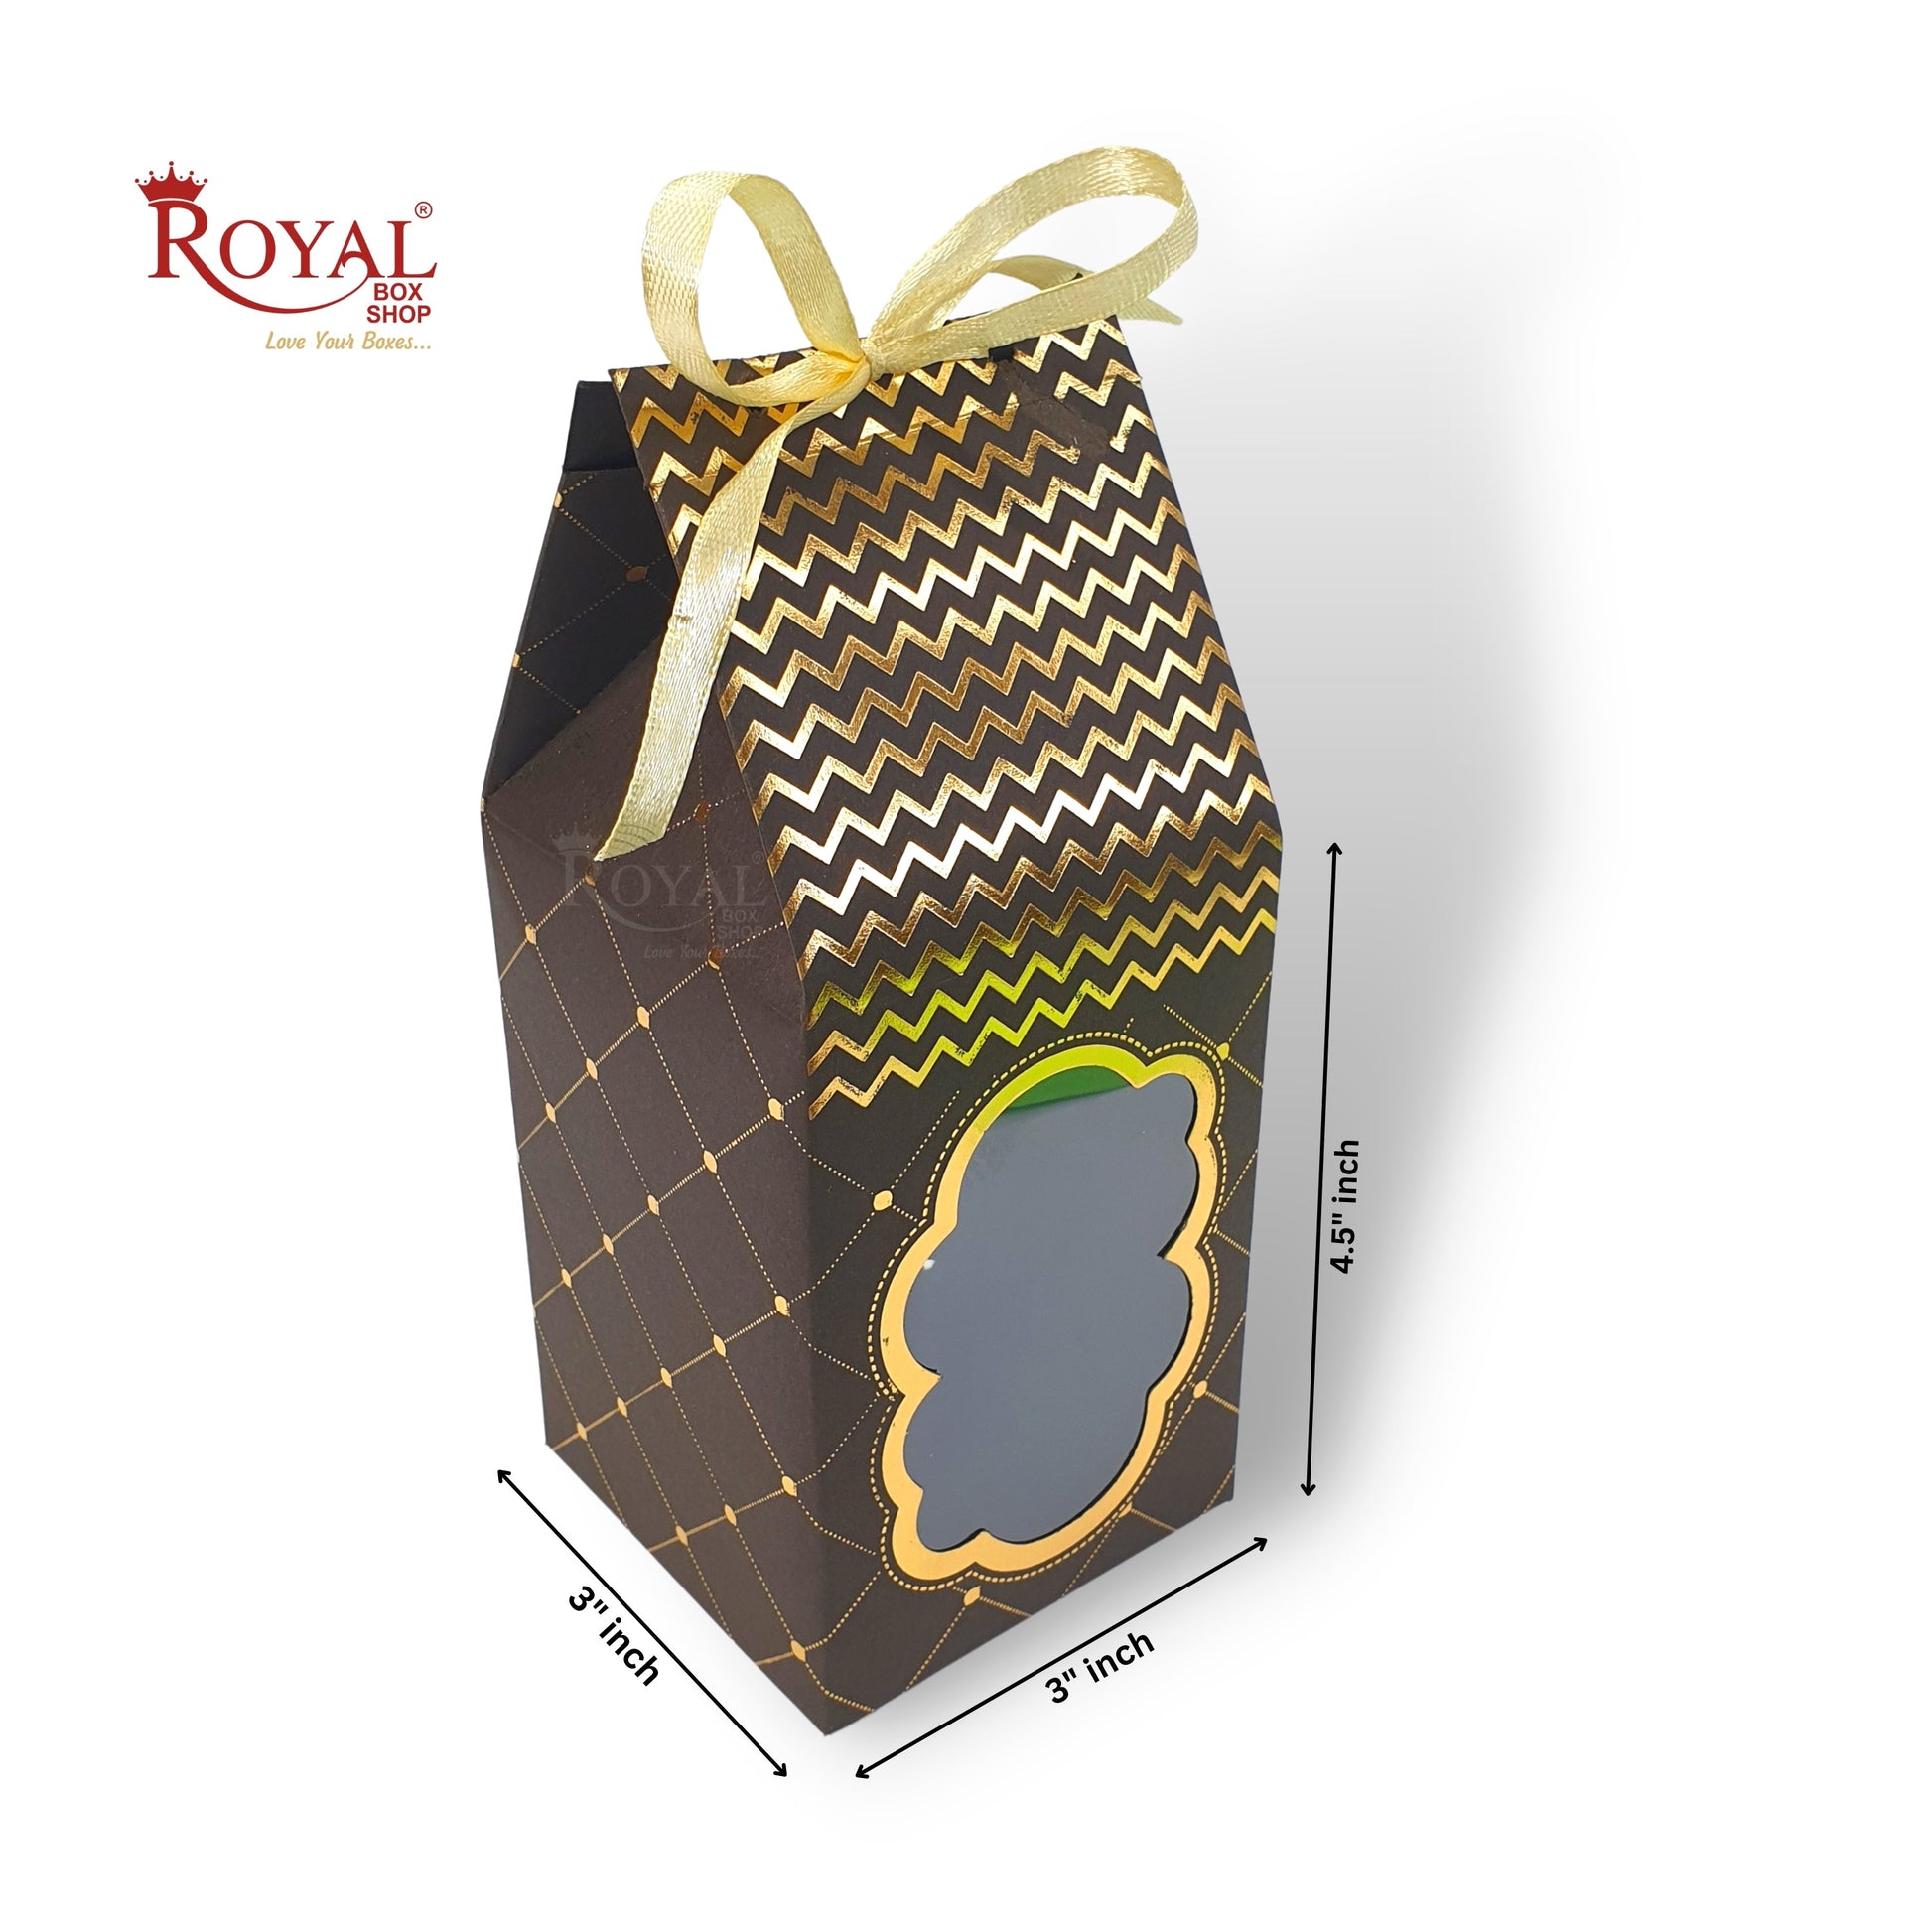 Premium Gift Box with Window I Brown Gold Leafing Print I 4.5x3x3 inches I For Return Favor Gift, Baby Shower Gifts, Room Hampers, Candy Box, Birthday Return Gift Royal Box Shop